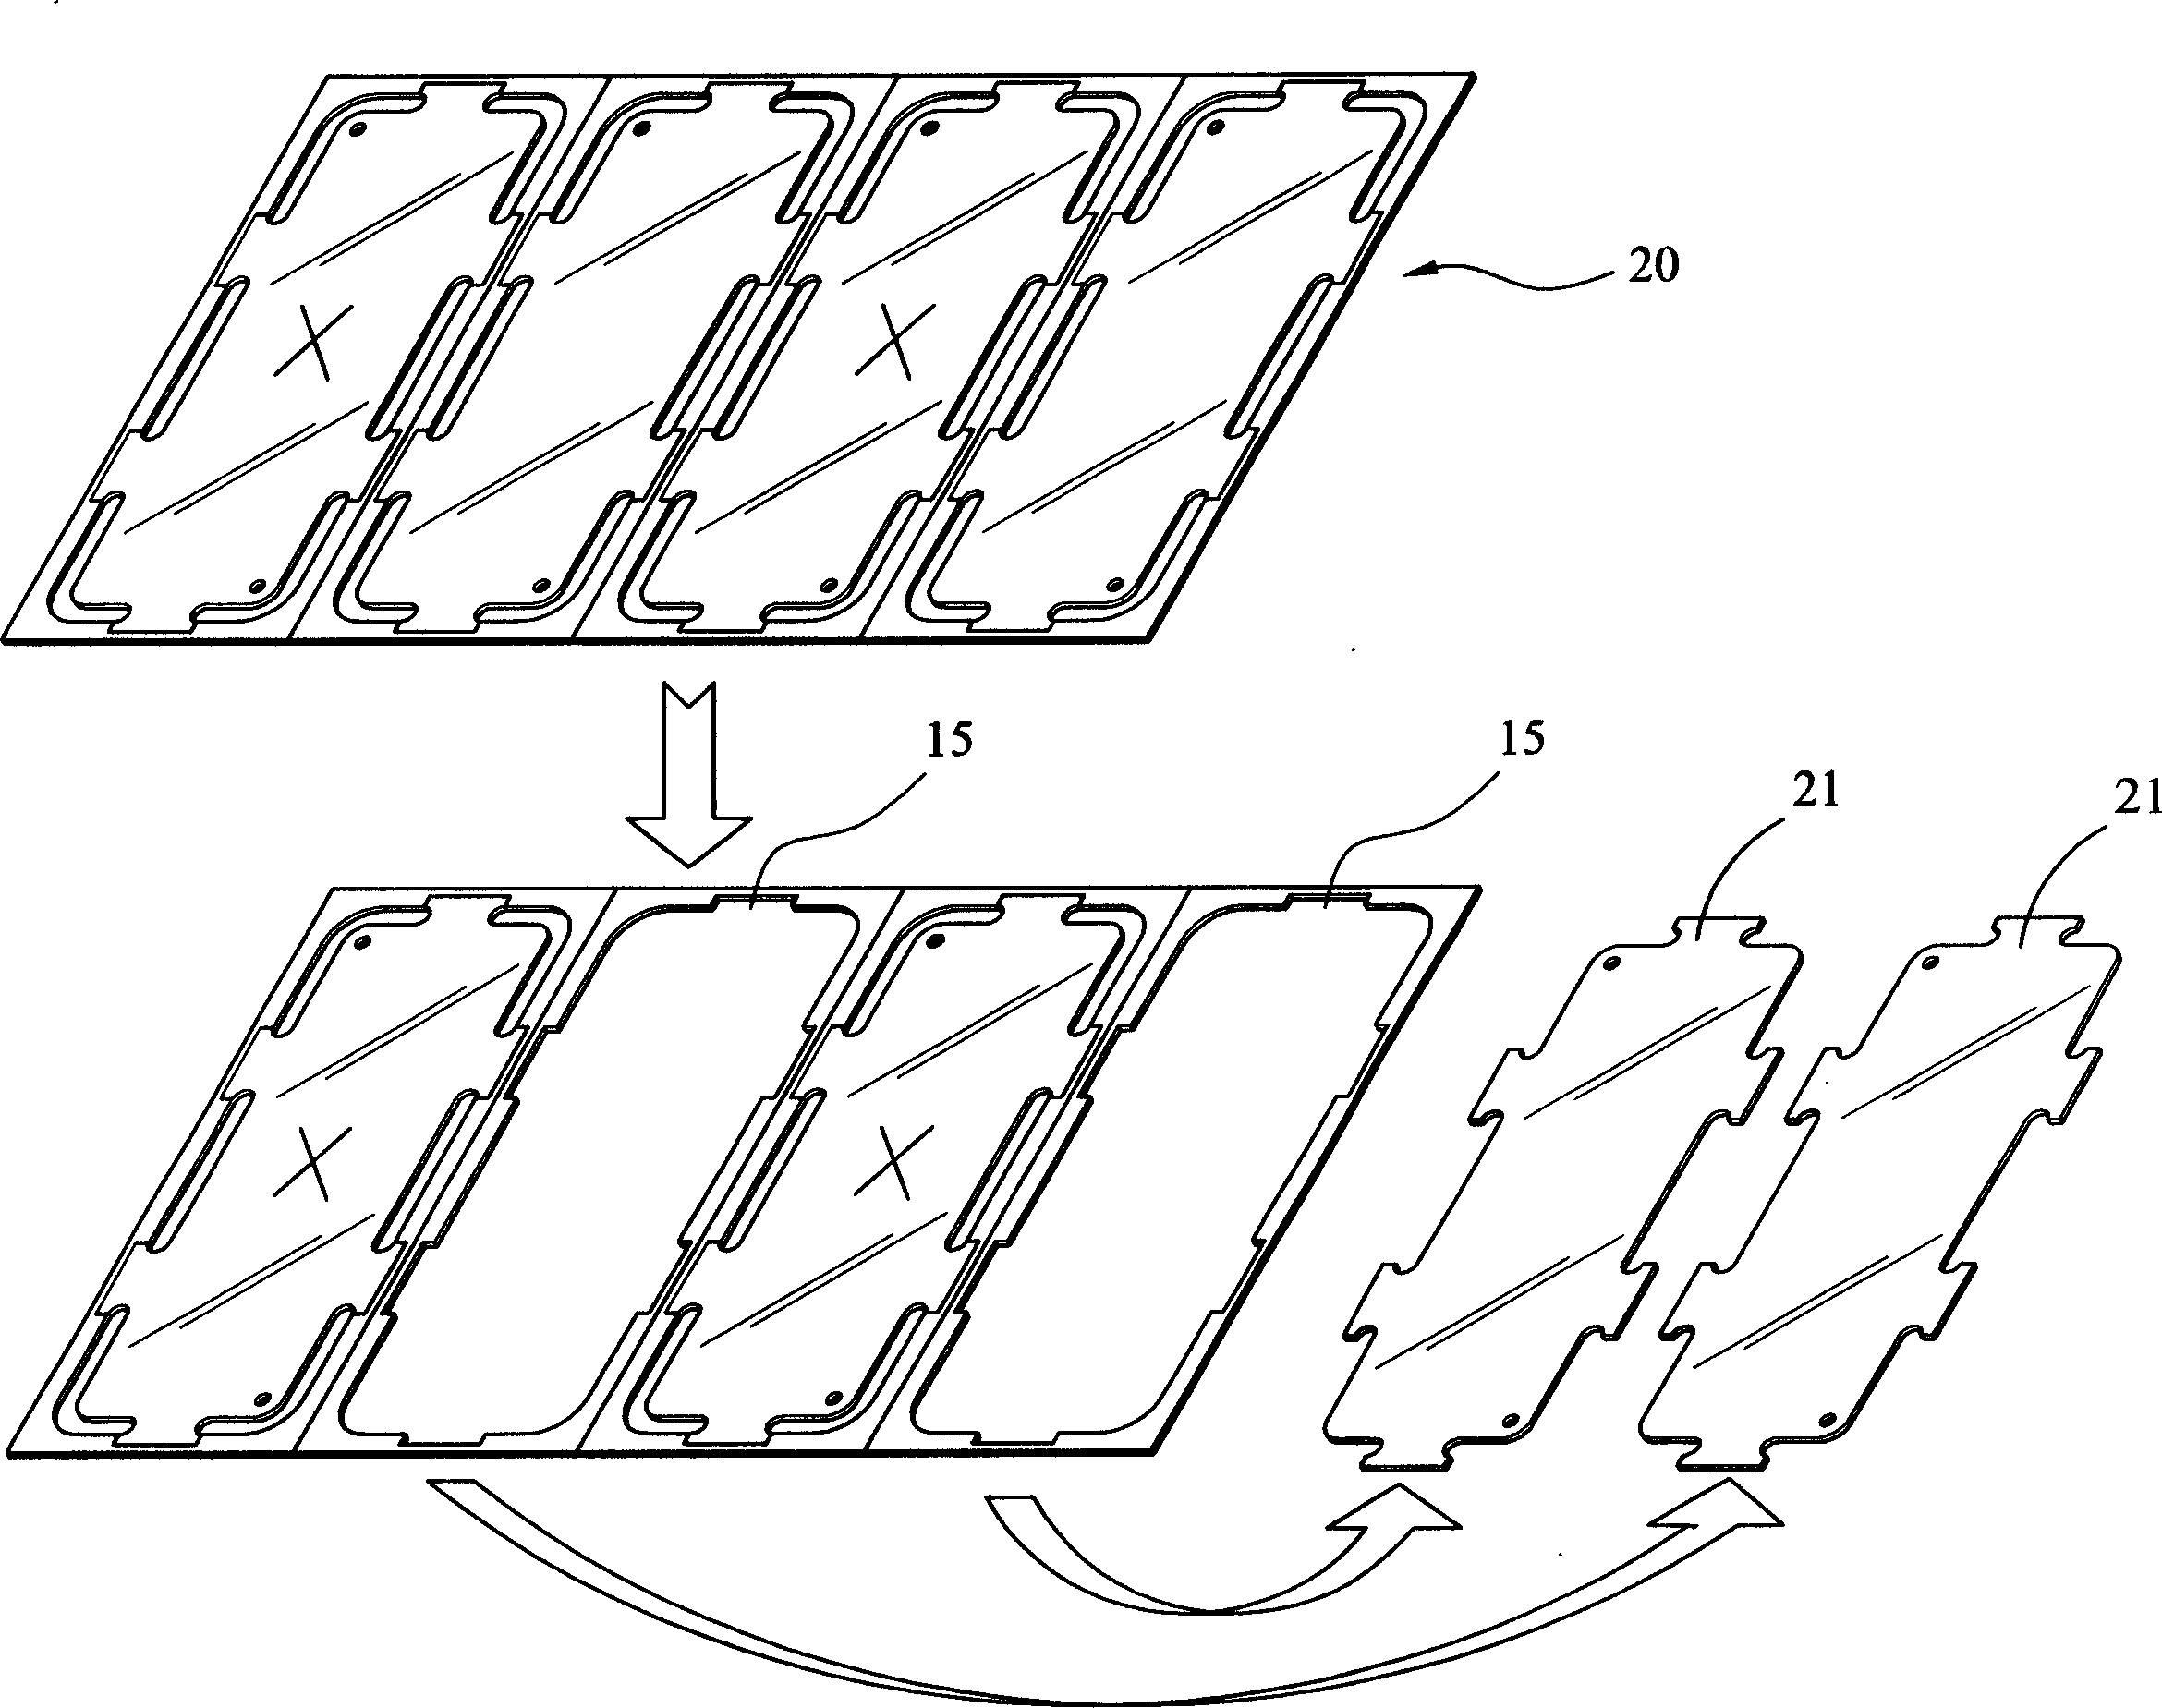 Method for replacing and resetting imperfect multi-piece printed circuit board